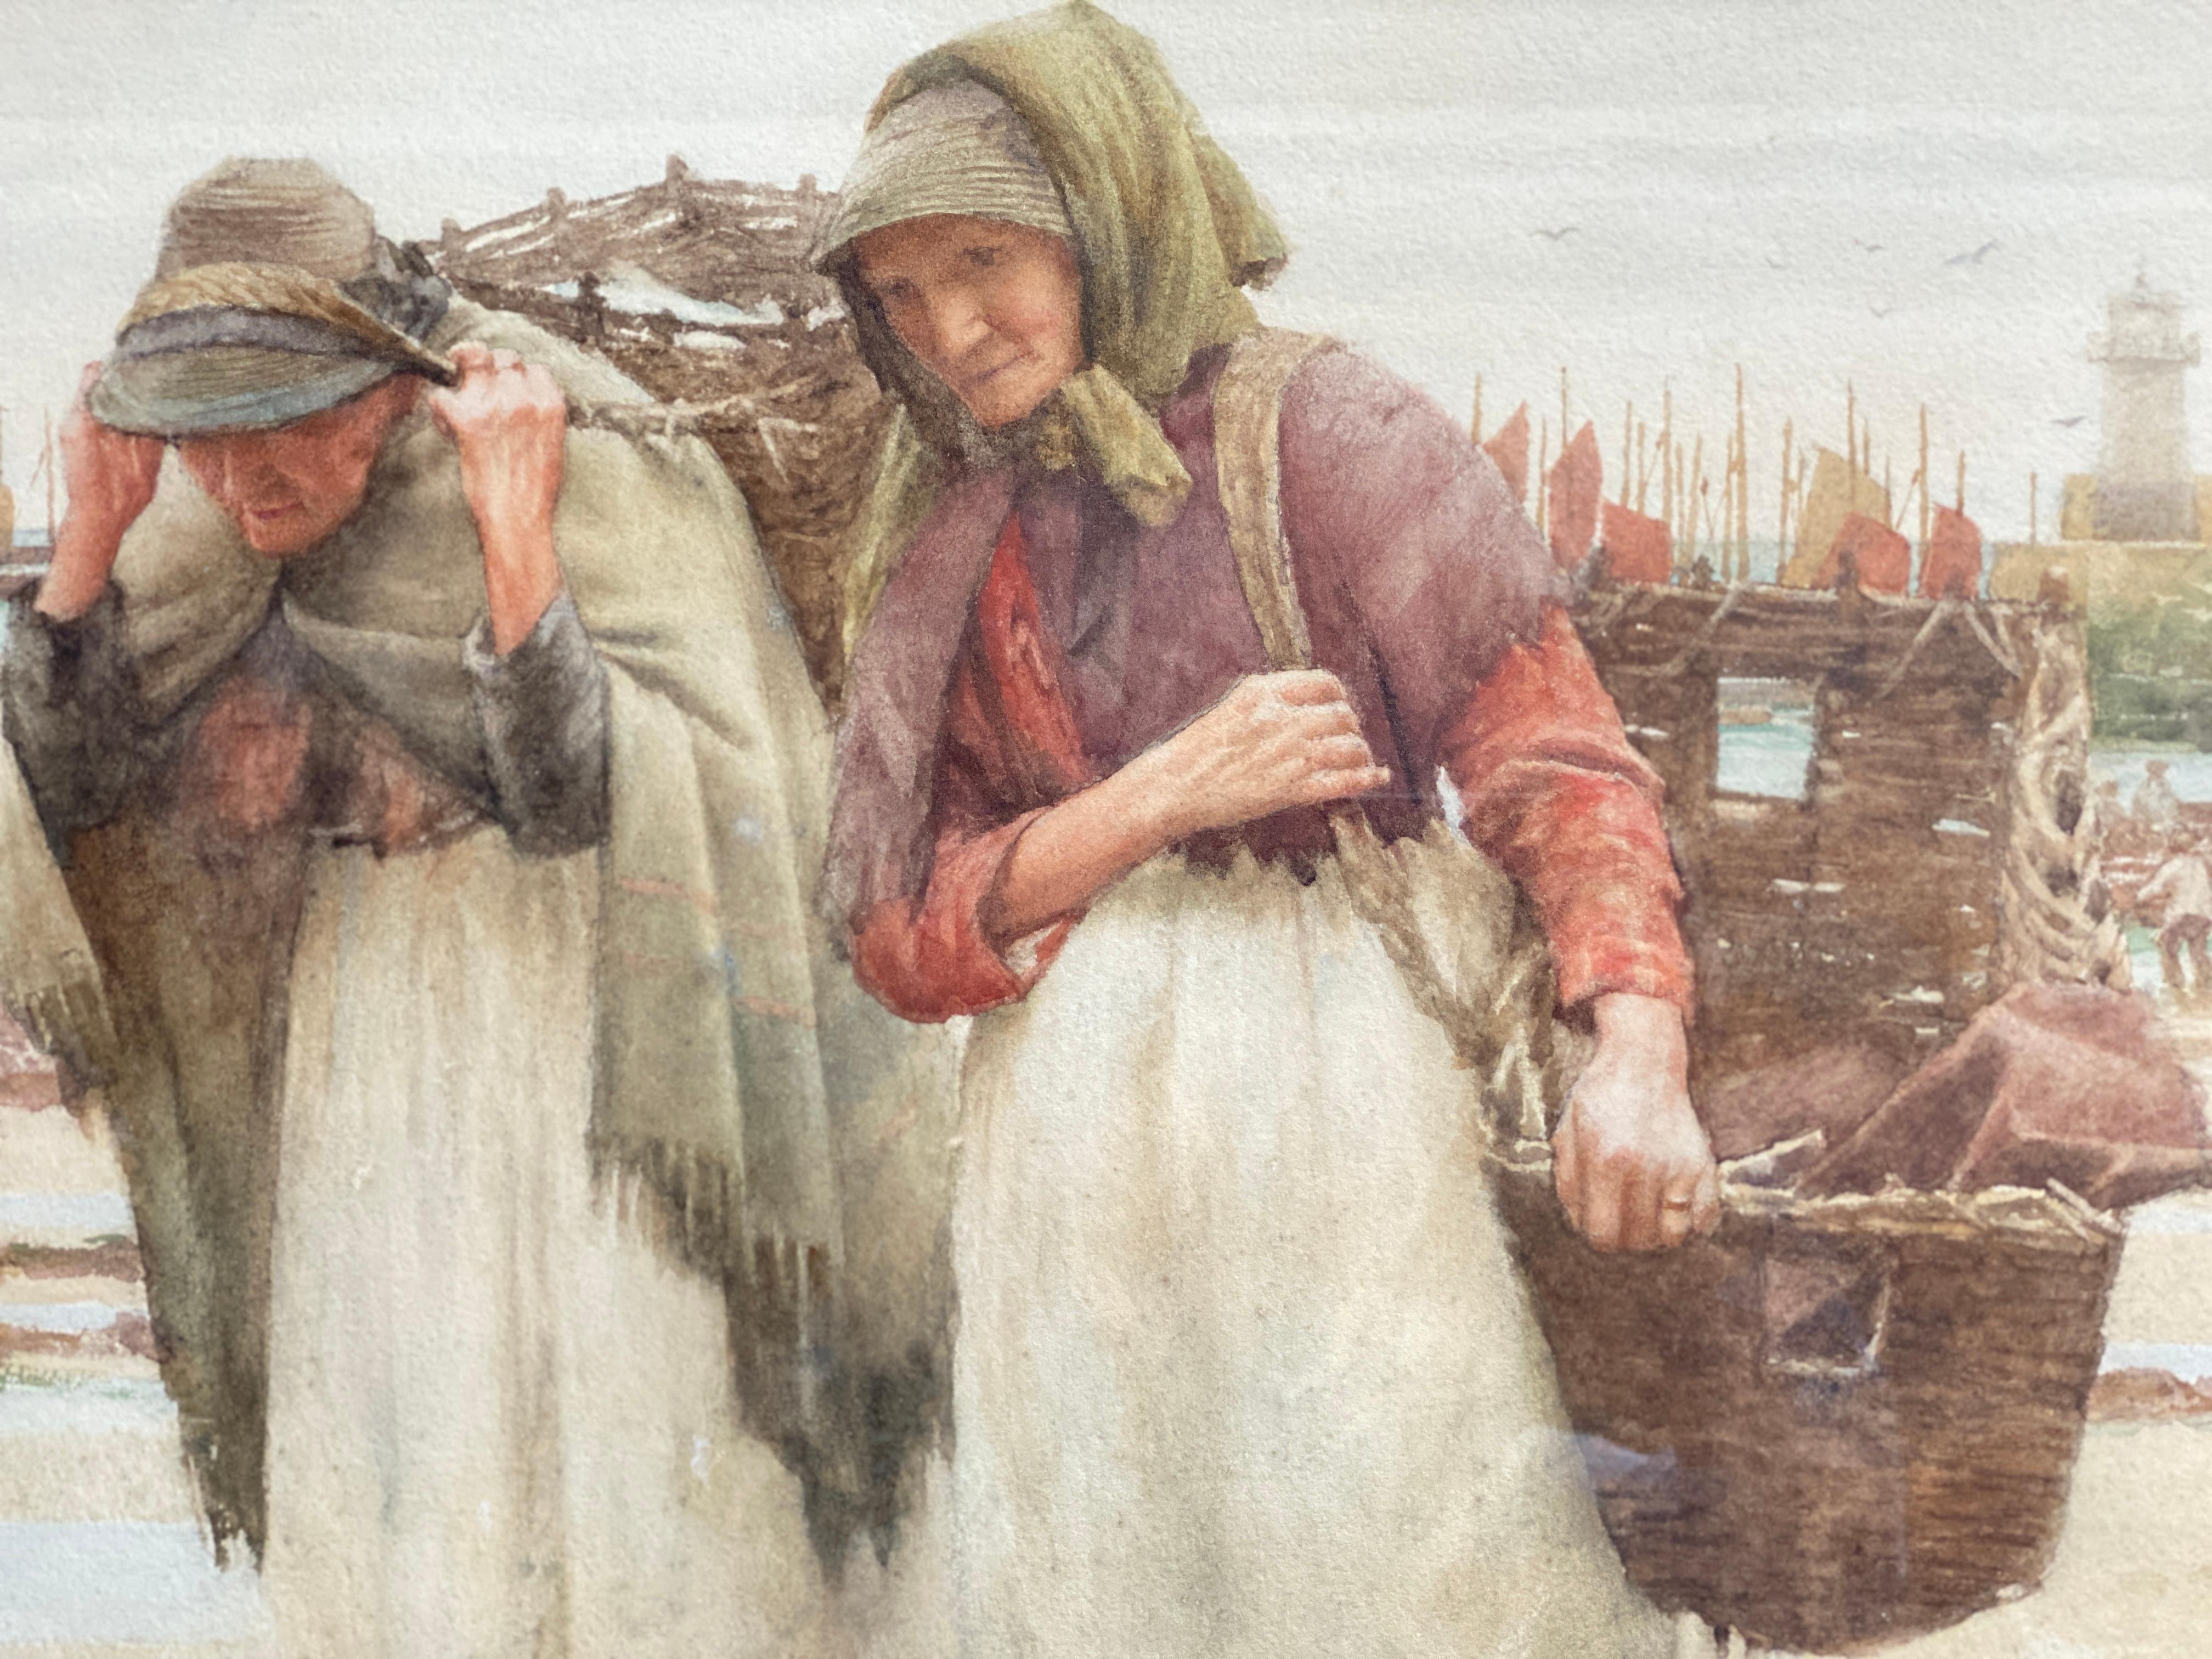 Two Fisherwoman Carrying a Basket
Newlyn Harbour - The Breadwinners

Langley Walter

Birmingham 1852 – 1922 Penzance, United Kingdom
English Painter

Signature: Signed bottom right
Medium: Aquarelle
Dimensions: Image size 44 x 61 cm, frame size 57 x